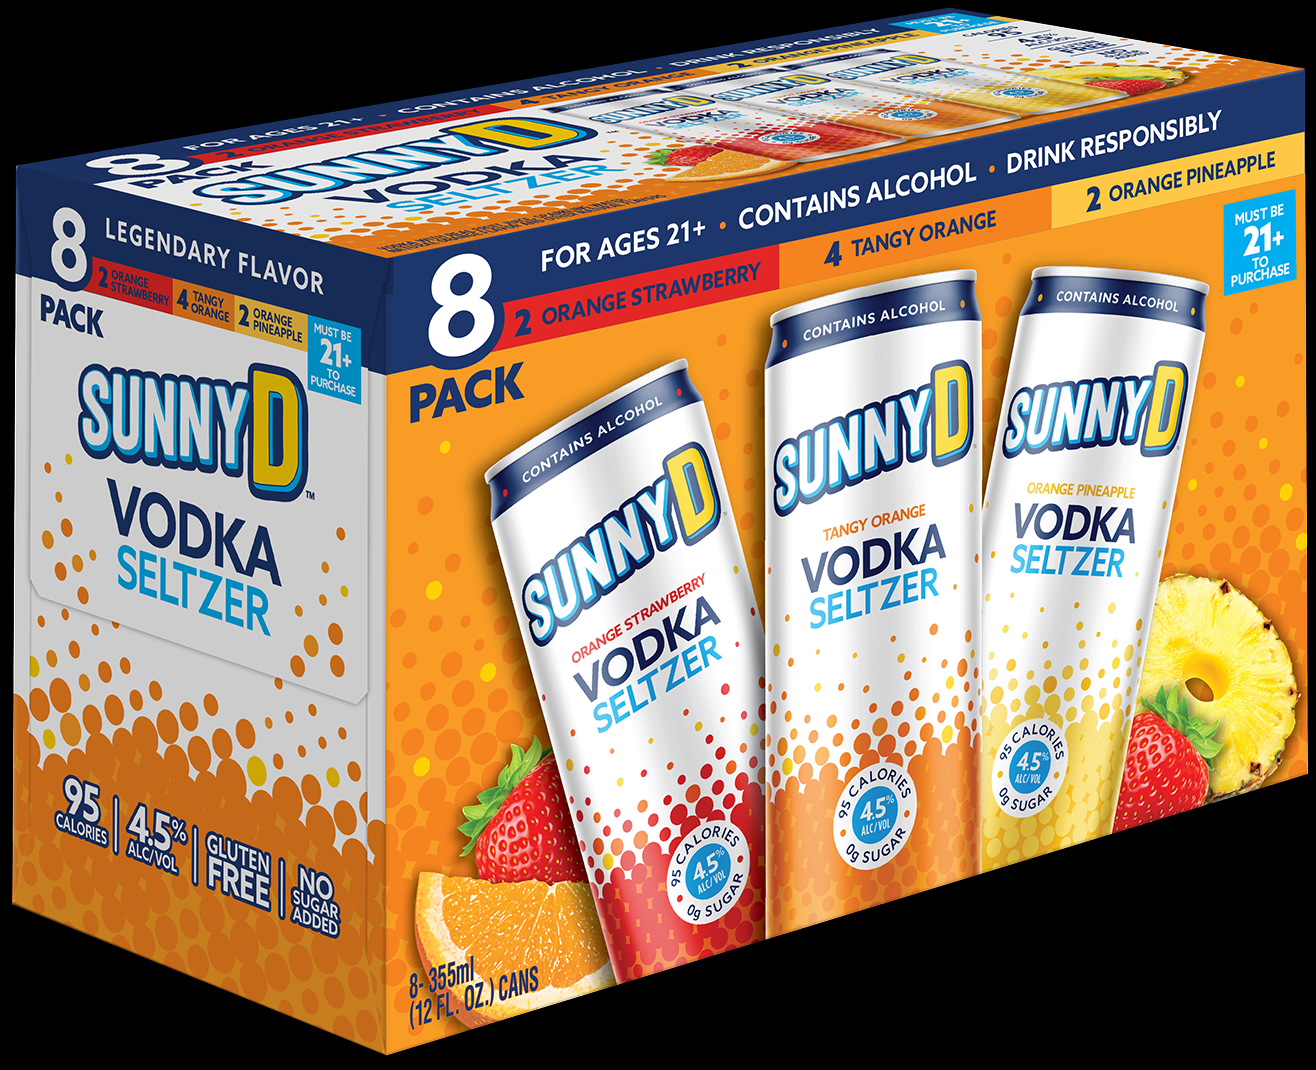 A value pack of SunnyD’s vodka seltzers, available at stores like Walmart. (SunnyD)